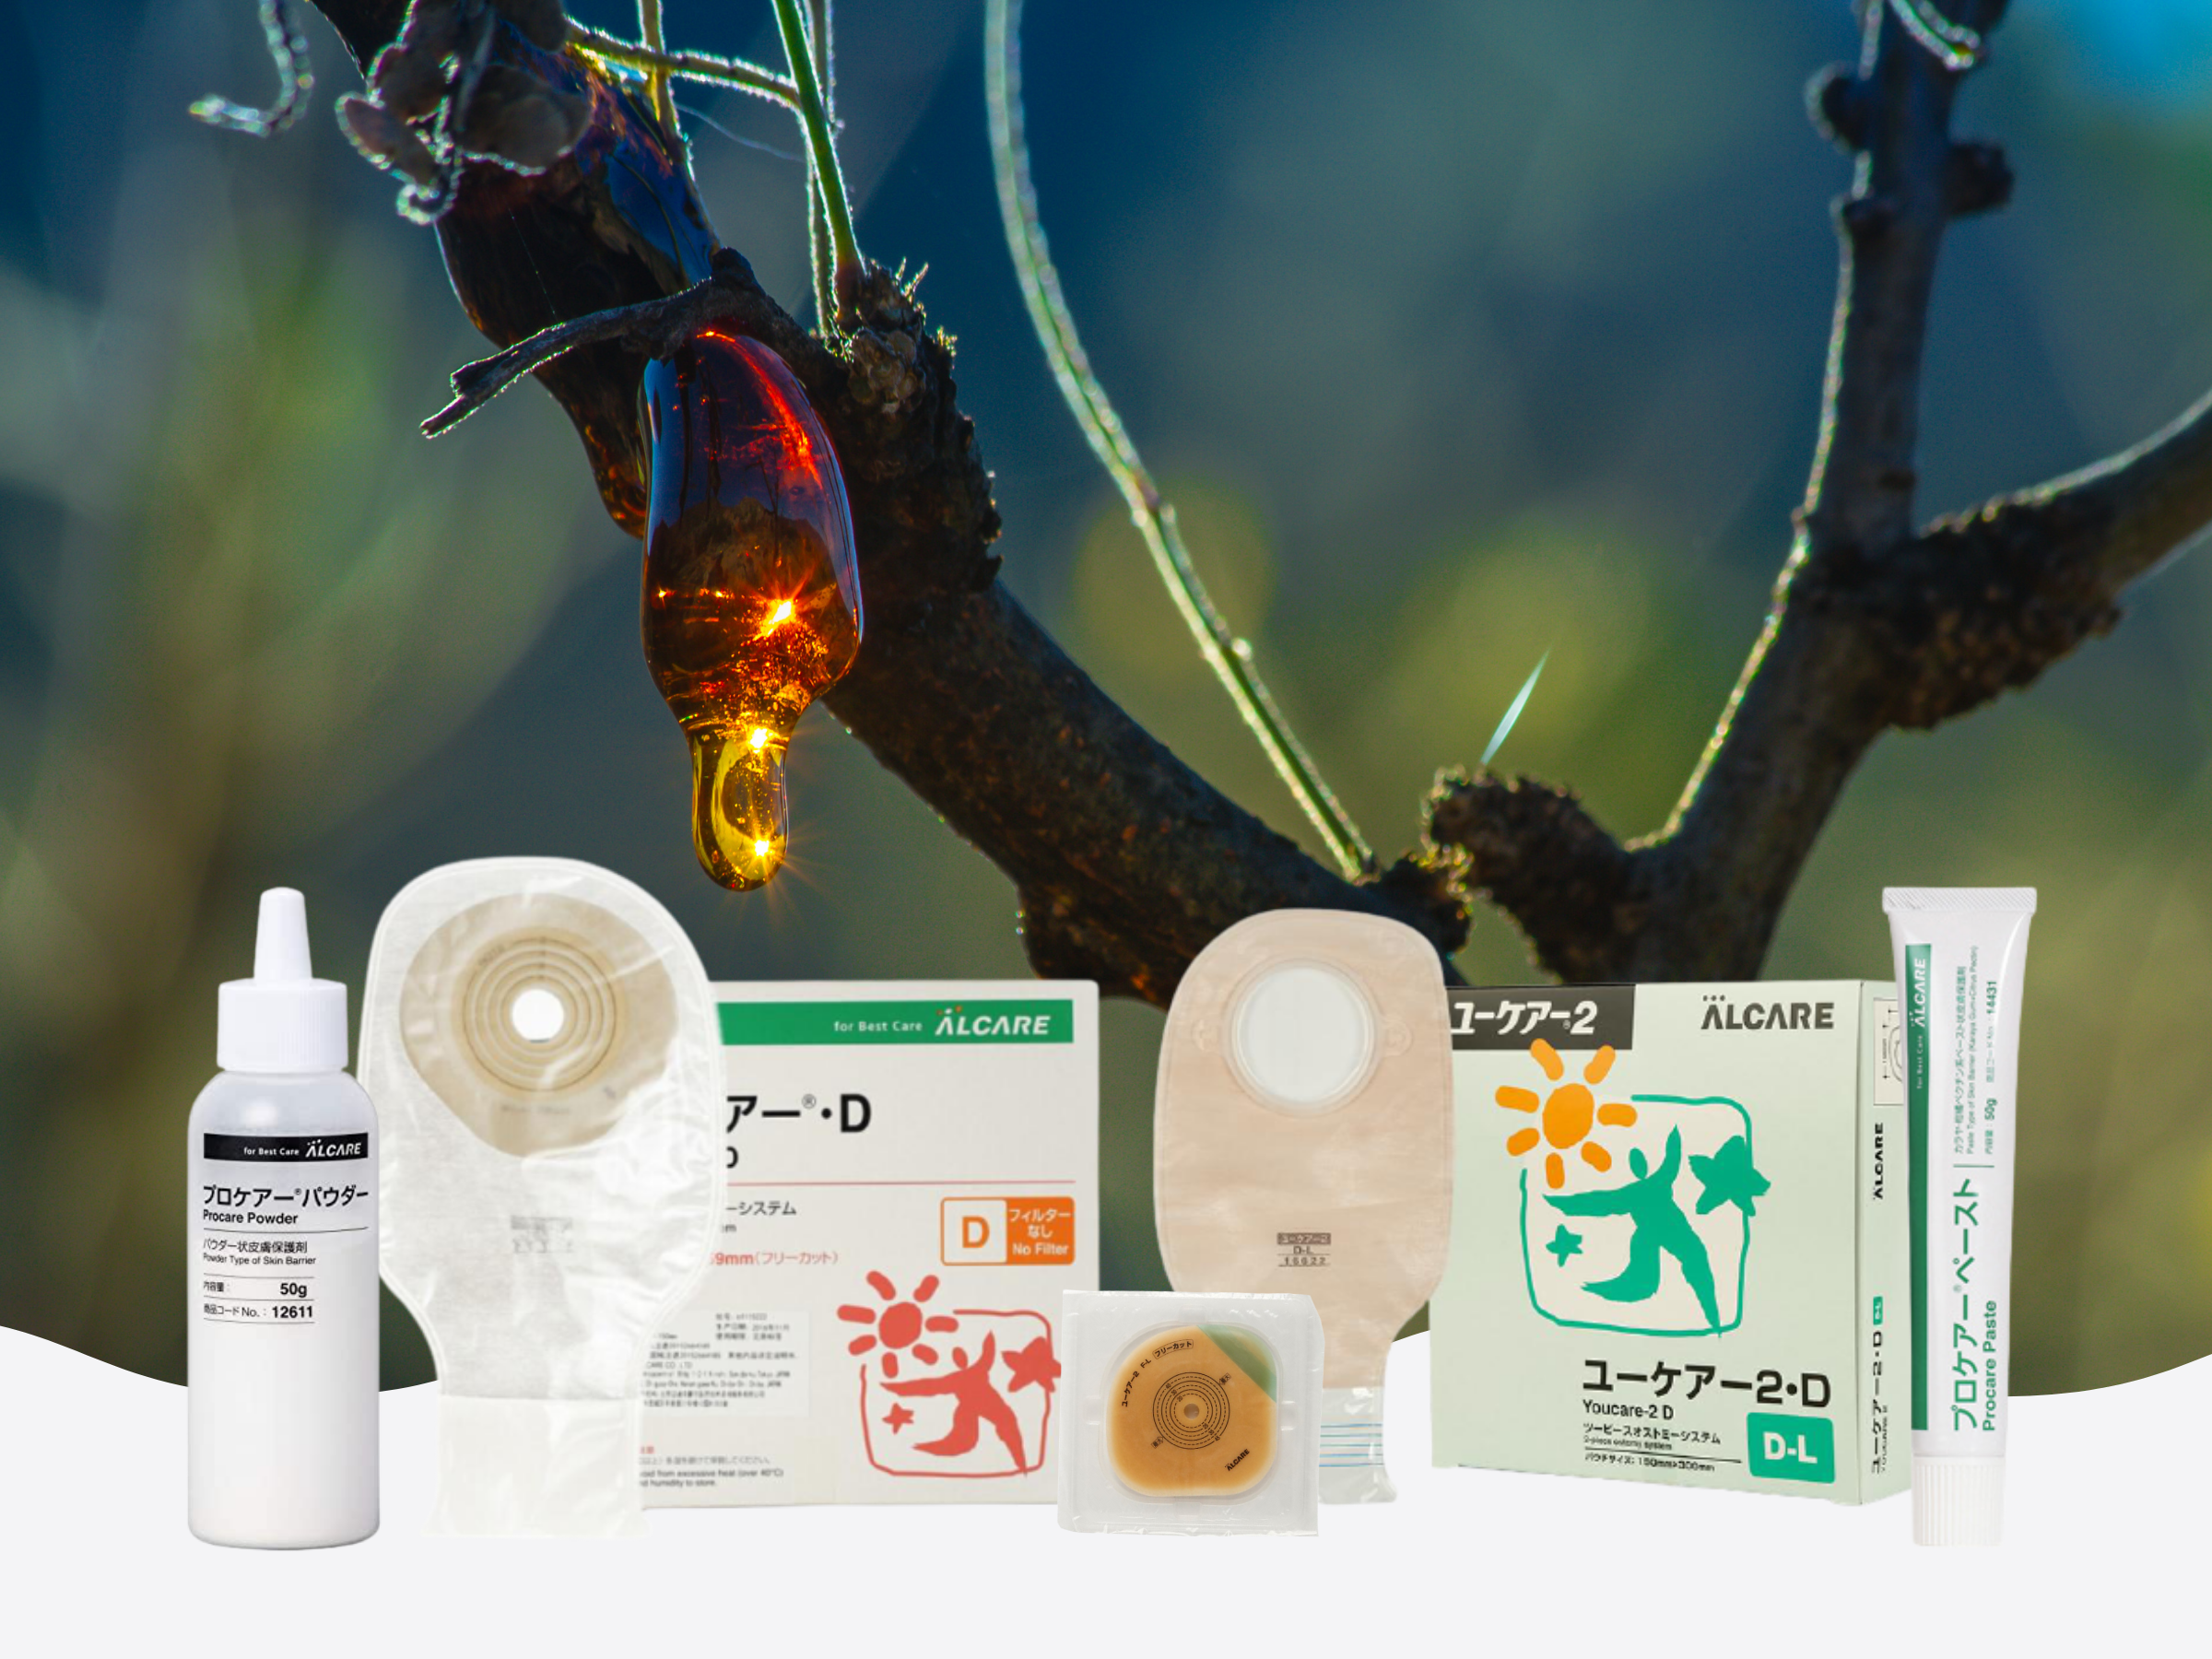 ALCARE ostomy & stoma care products. From left: procare powder, youcare d stoma bag, youcare 2f faceplate, youcare 2d stoma bag, procare paste. In the background - Karaya gum dripping off a karaya tree.